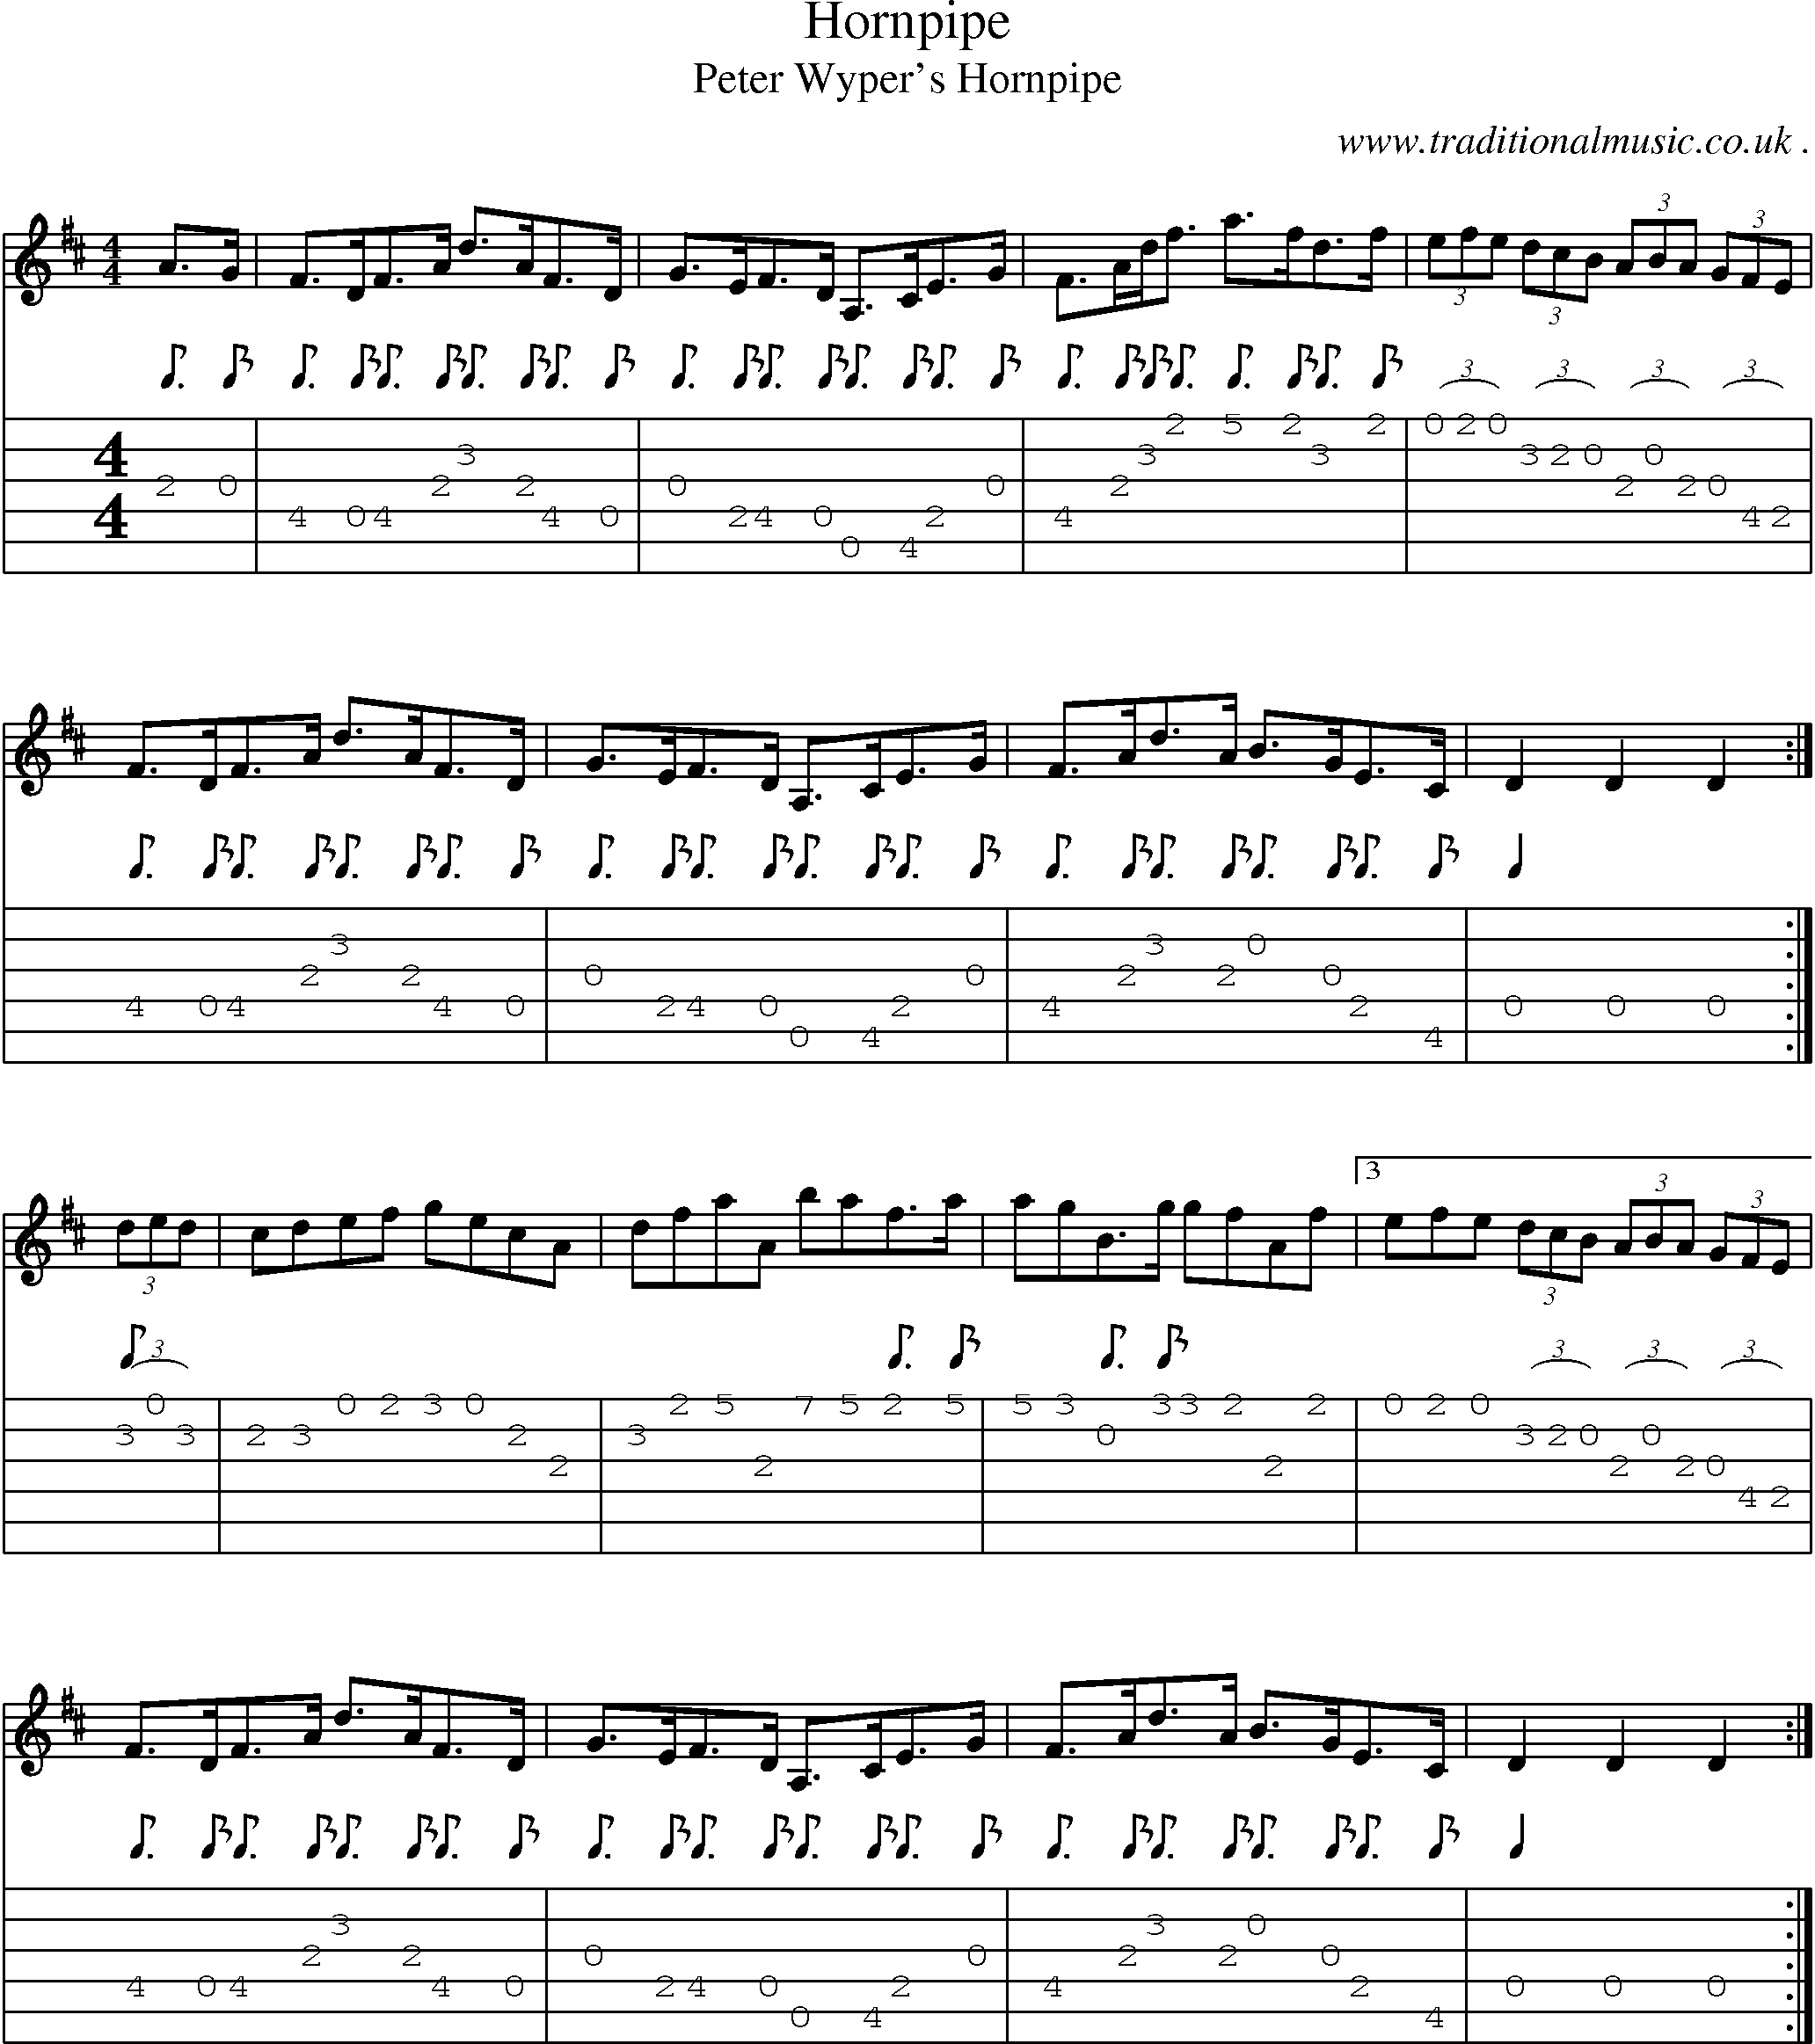 Sheet-music  score, Chords and Guitar Tabs for Hornpipe